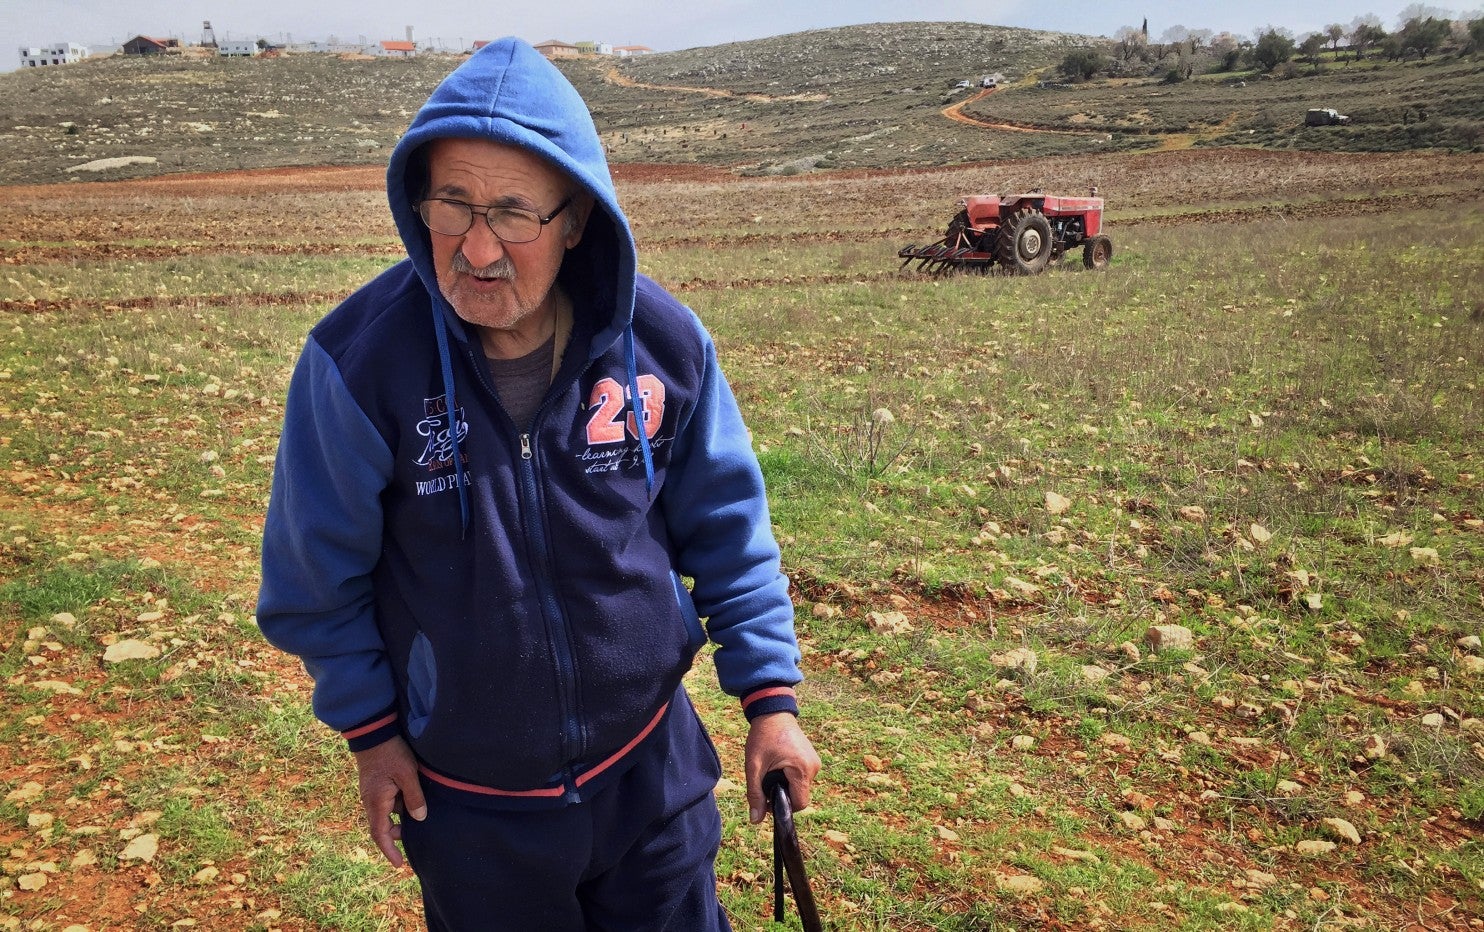 Fawzi Ibrahim waited two months for the Israeli army to give him access to his wheat fields this year. He had only two days to try to plow and plant 50 acres of wheat